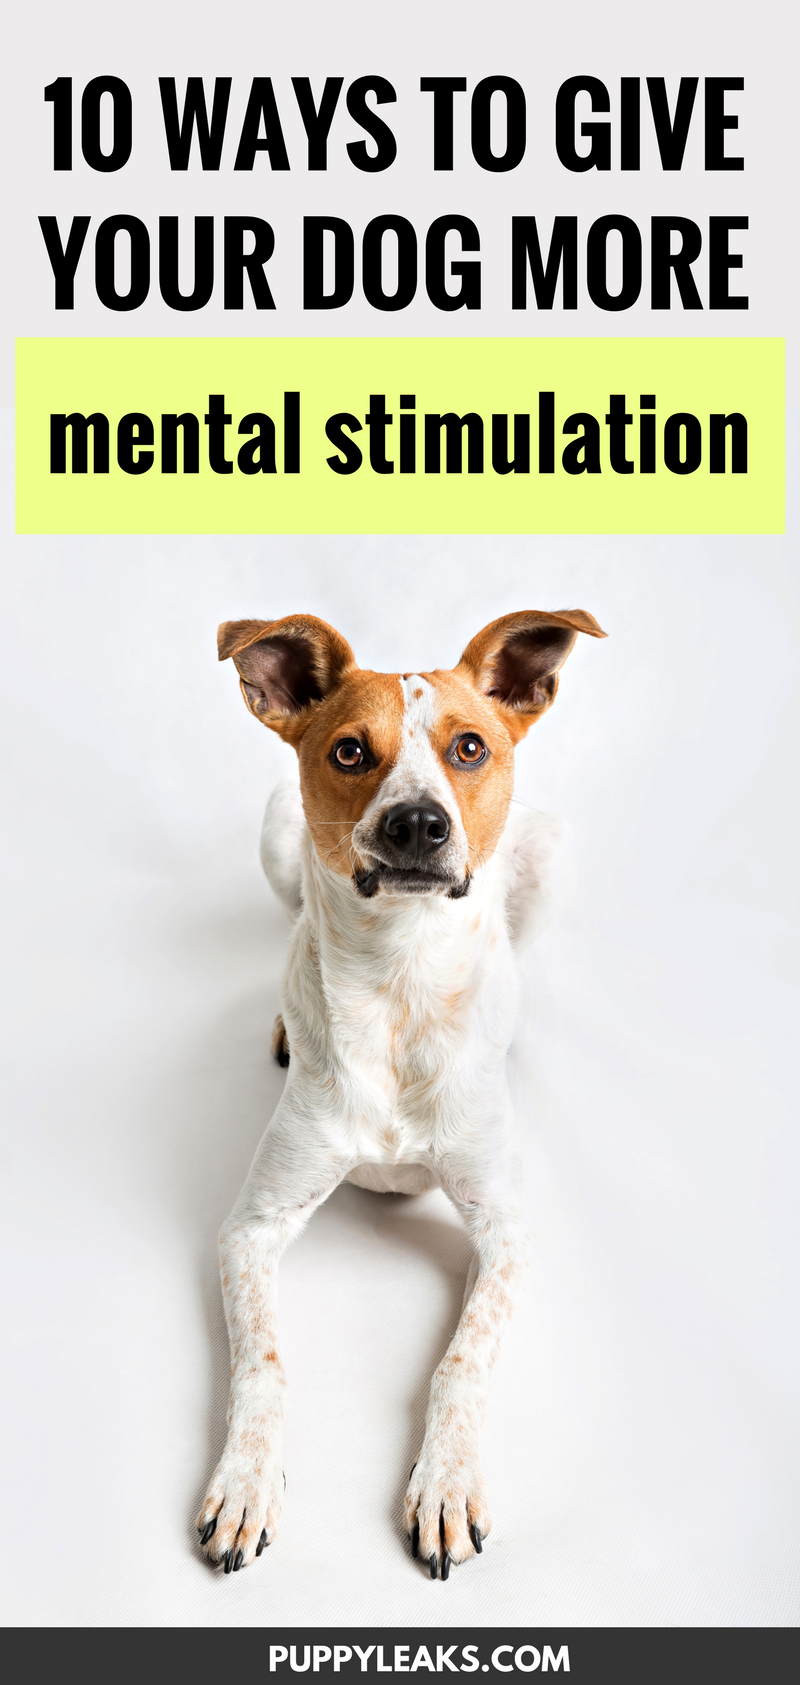 Ways to Give Your Dog More Mental Stimulation